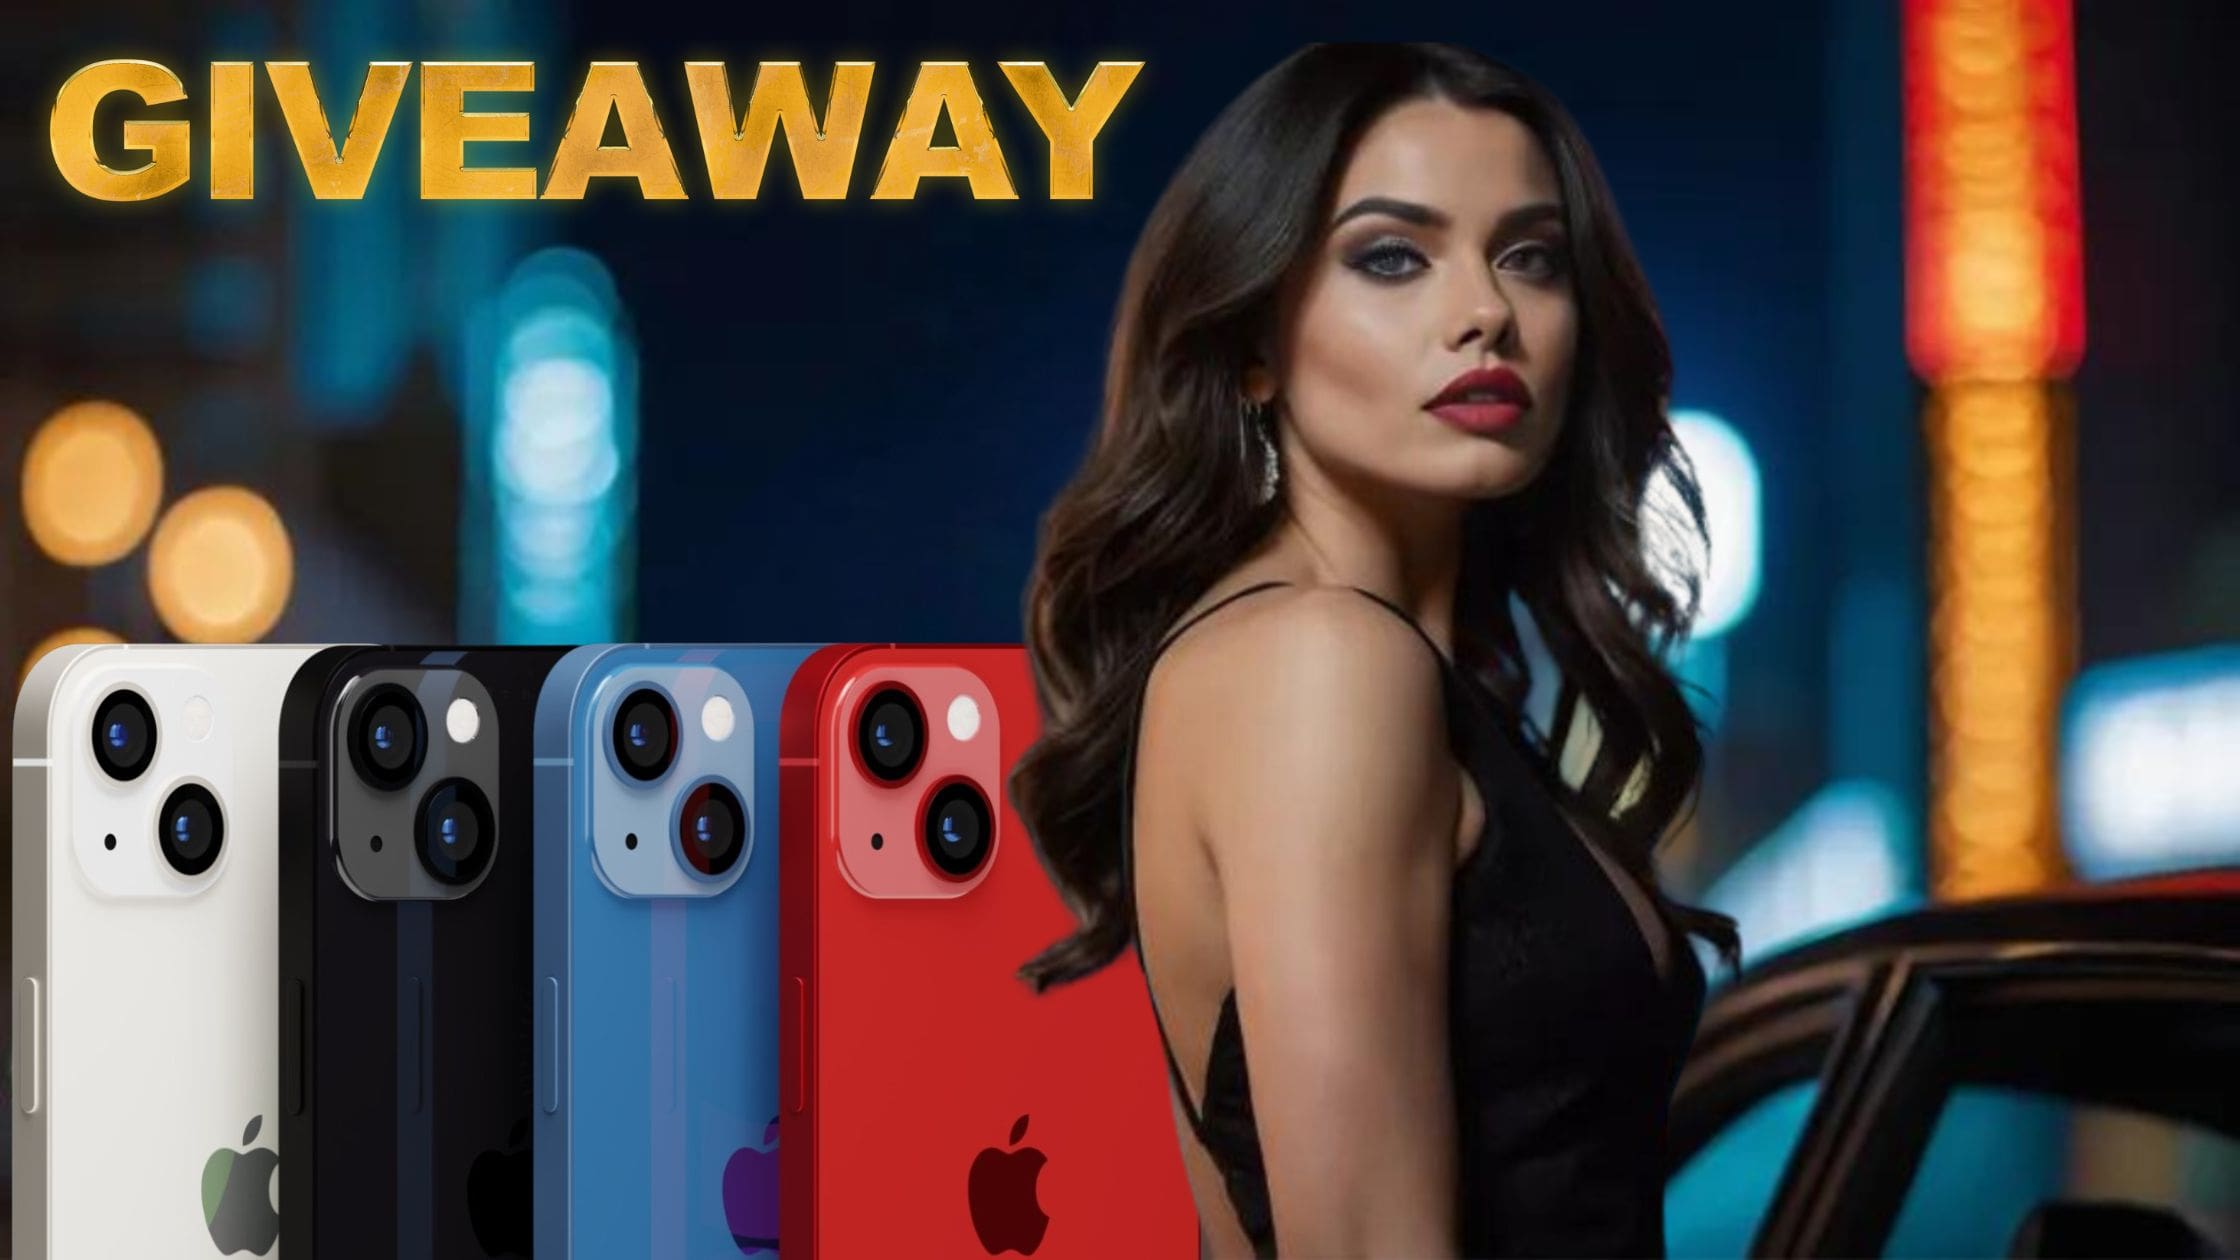 aiana giveaway